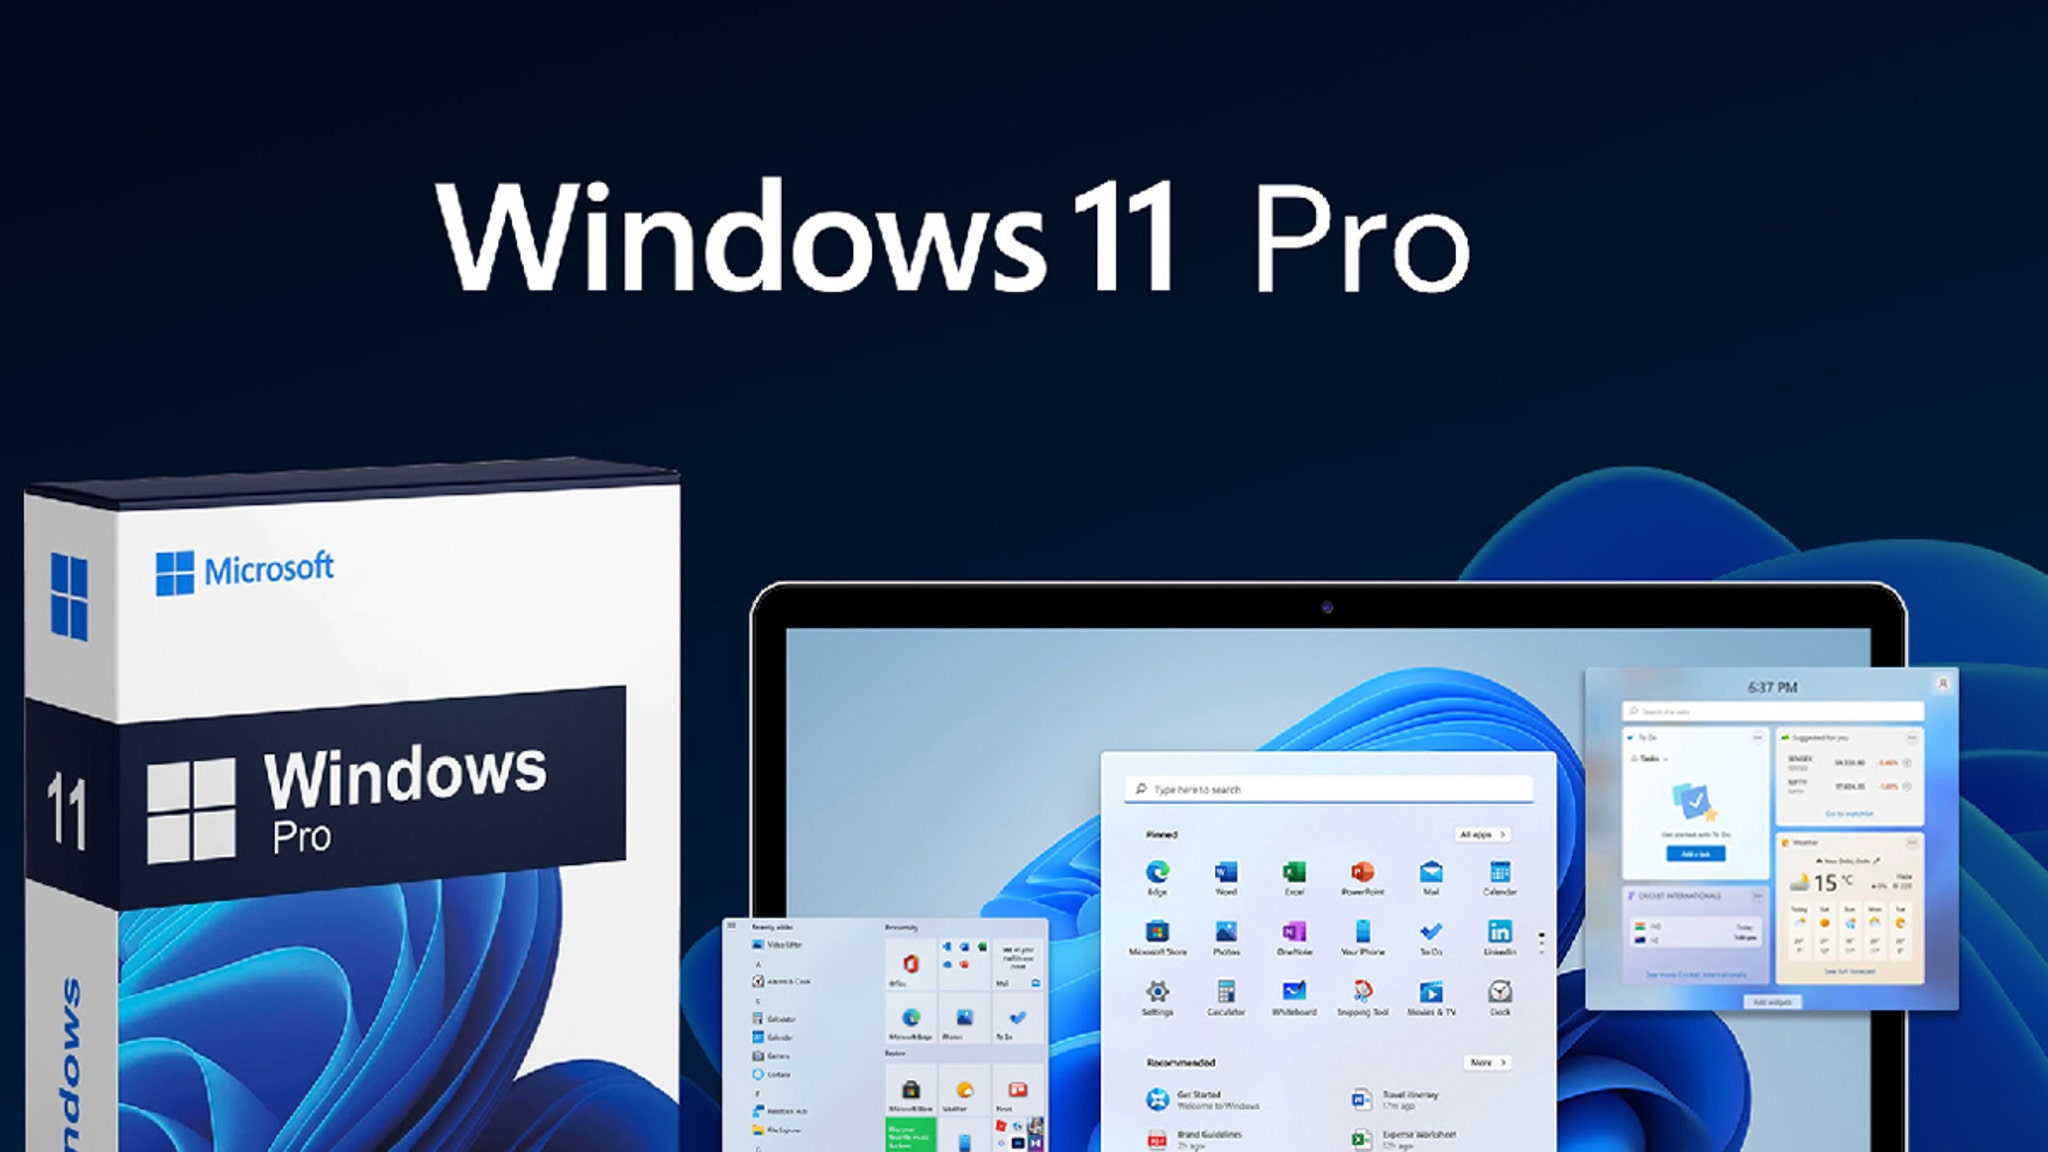 Give your computer a boost to Microsoft Windows 11 Pro, now just